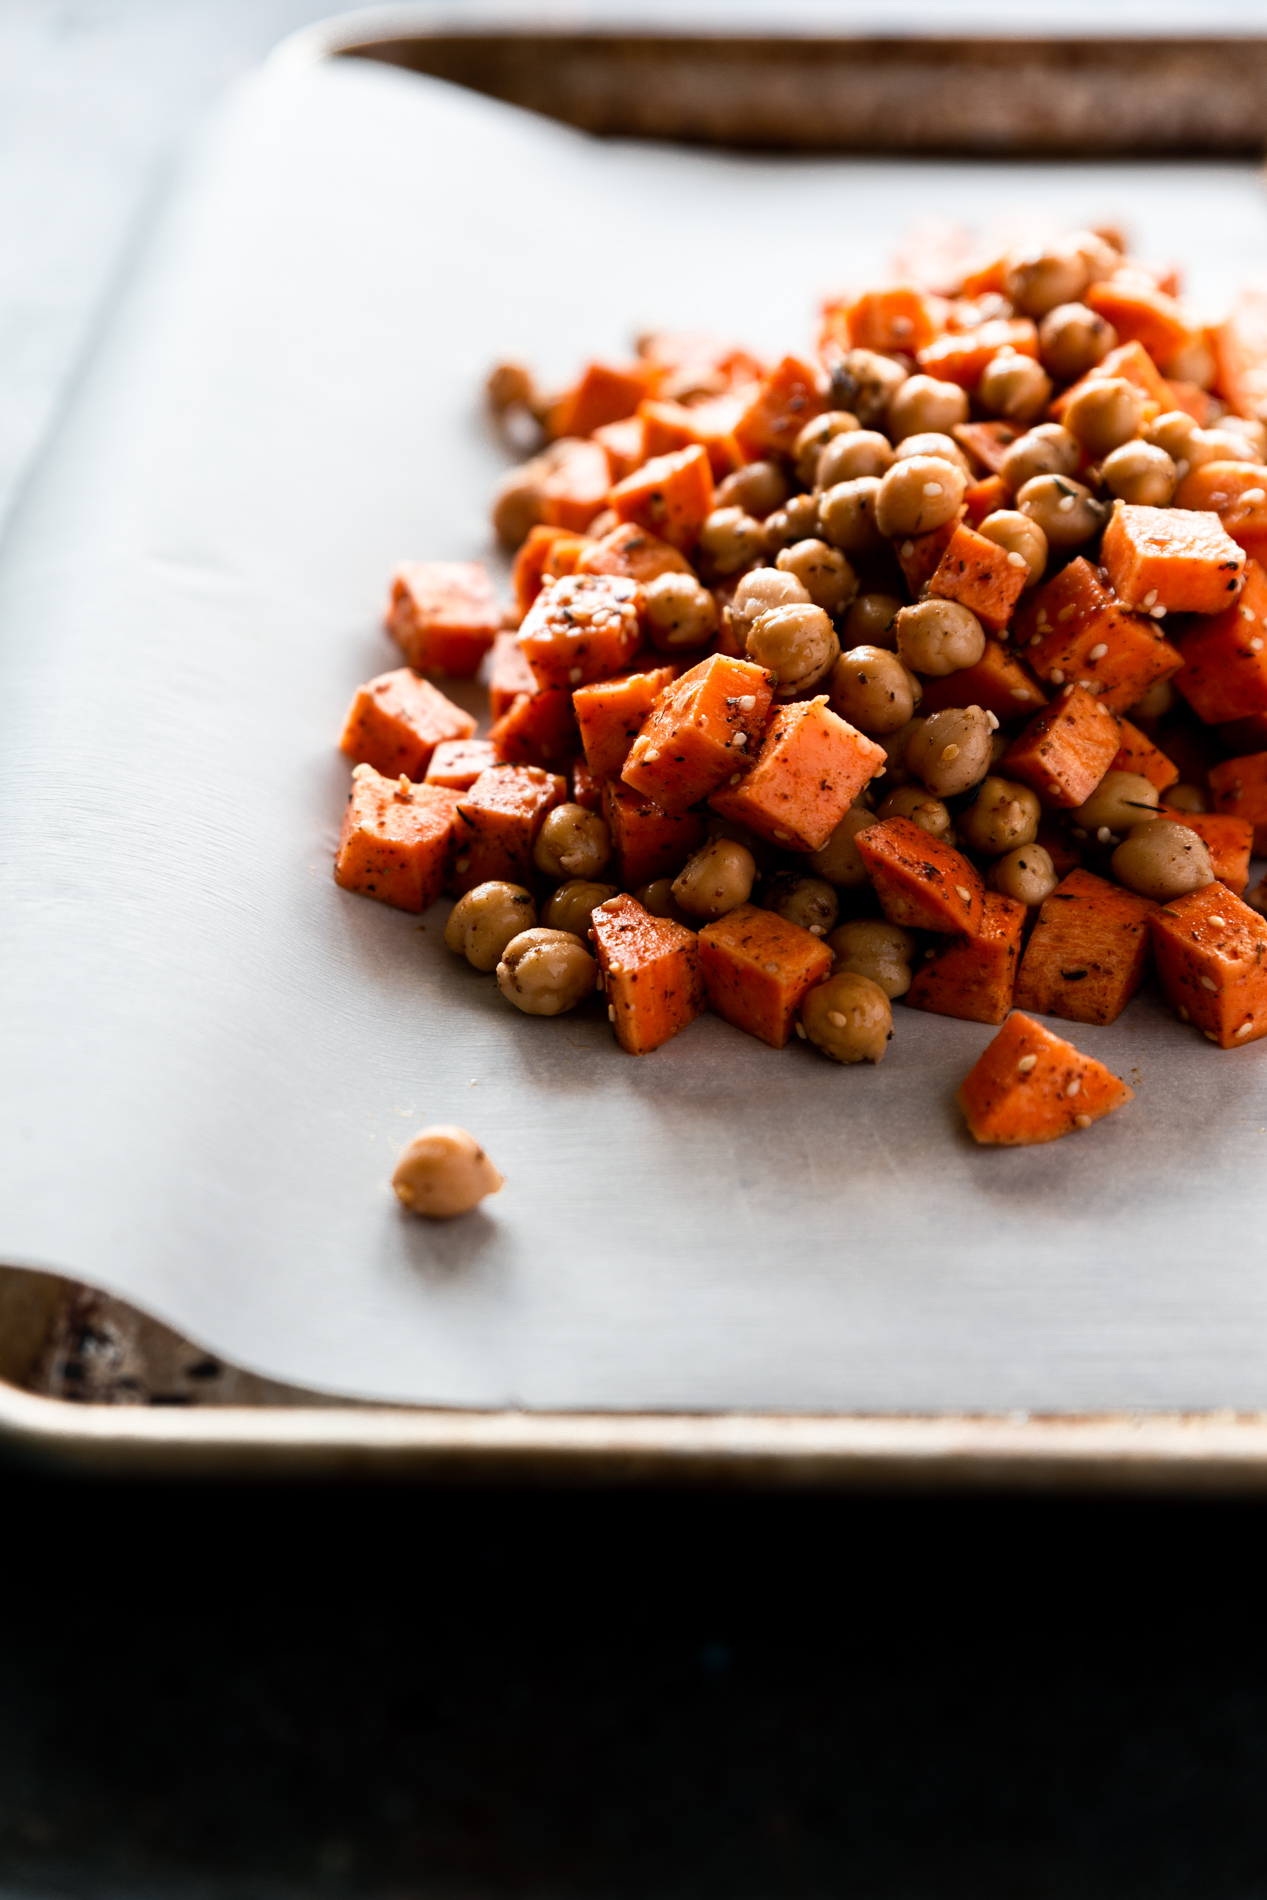 forty-five degree angled shot of a baking sheet lined with parchment paper containing uncooked diced sweet potato and chickpeas coated in olive oil, za'atar seasoning, and salt.